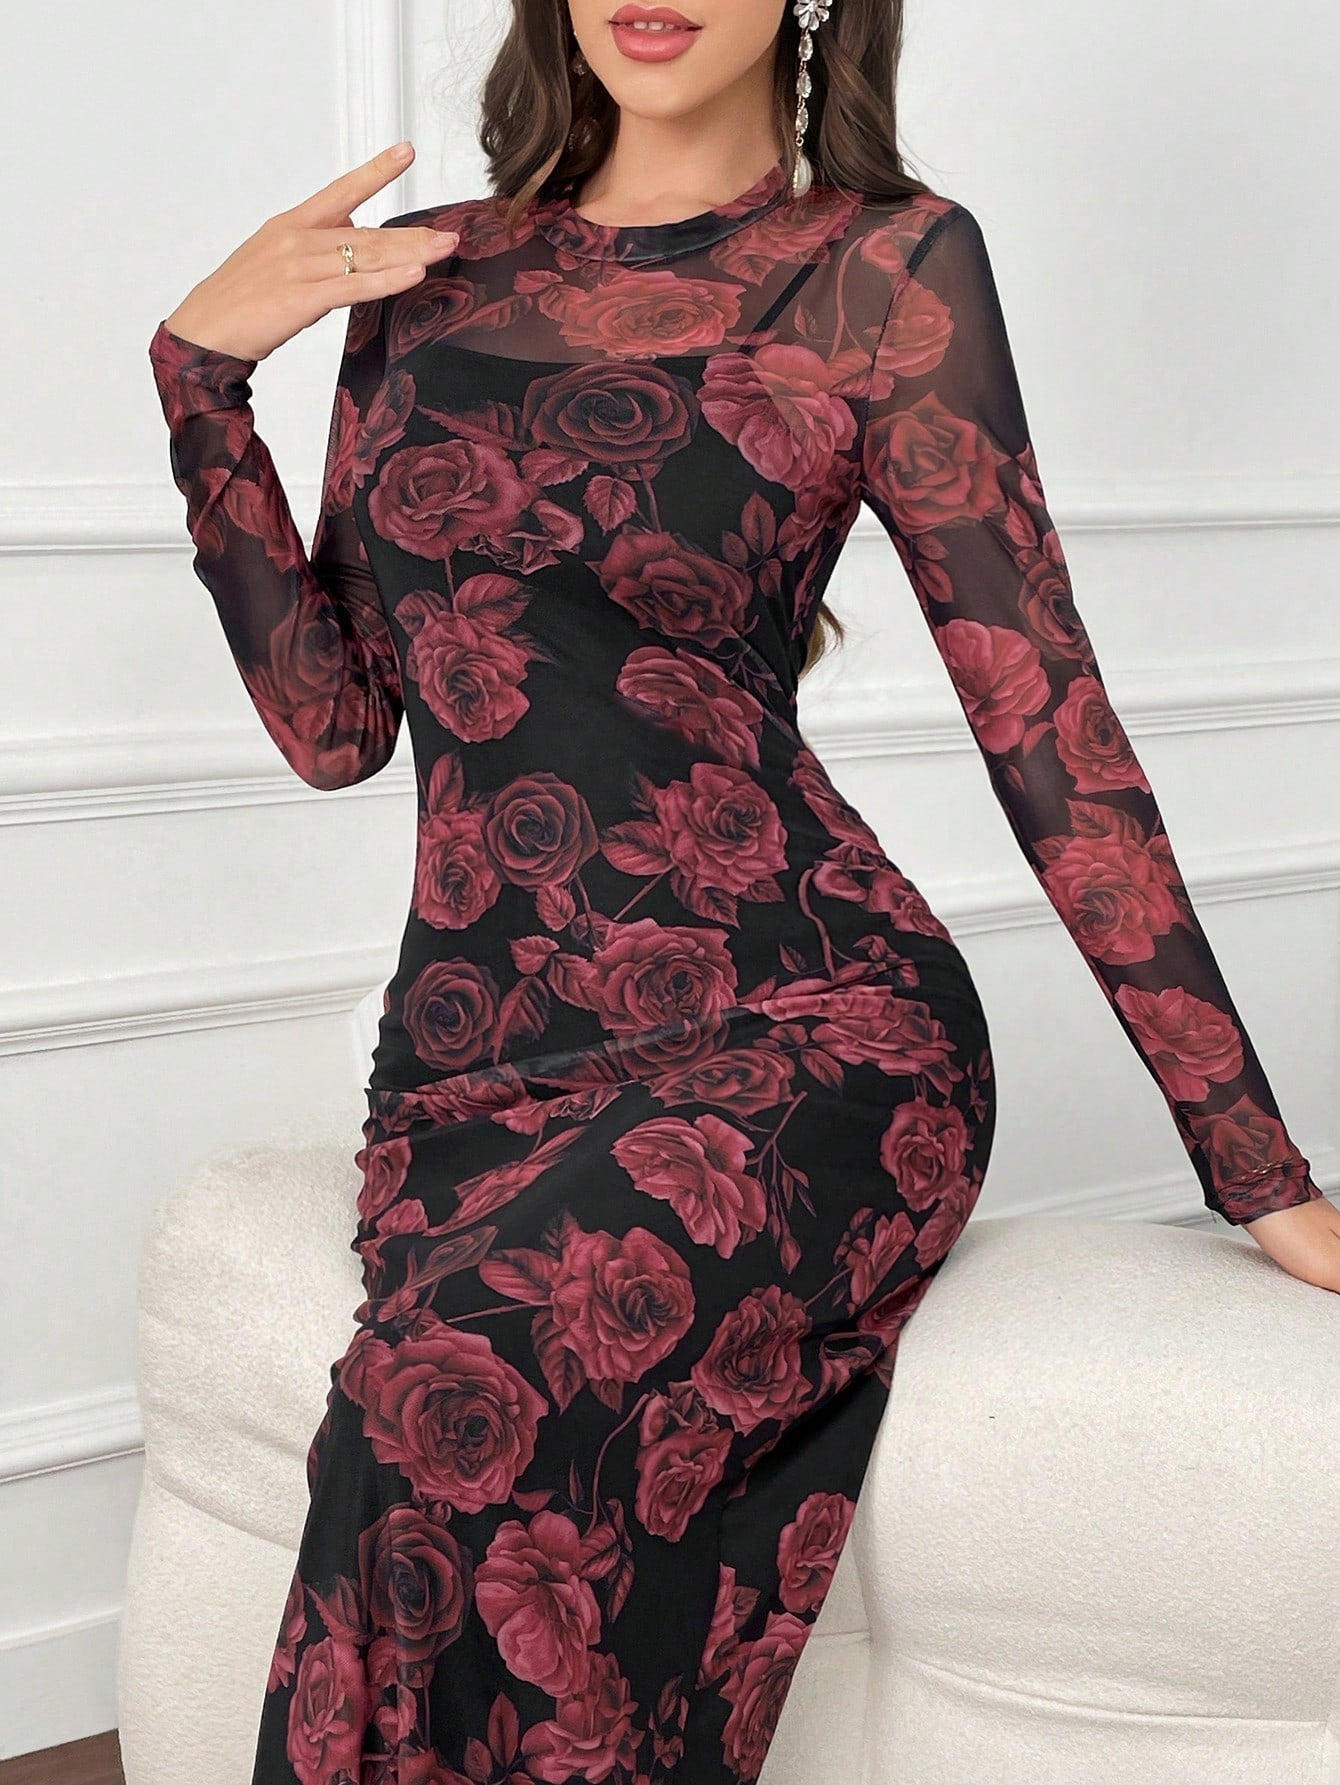 SHEIN Modely Floral Print Round Neck Bodycon Long Sleeve Dress - Negative Apparel